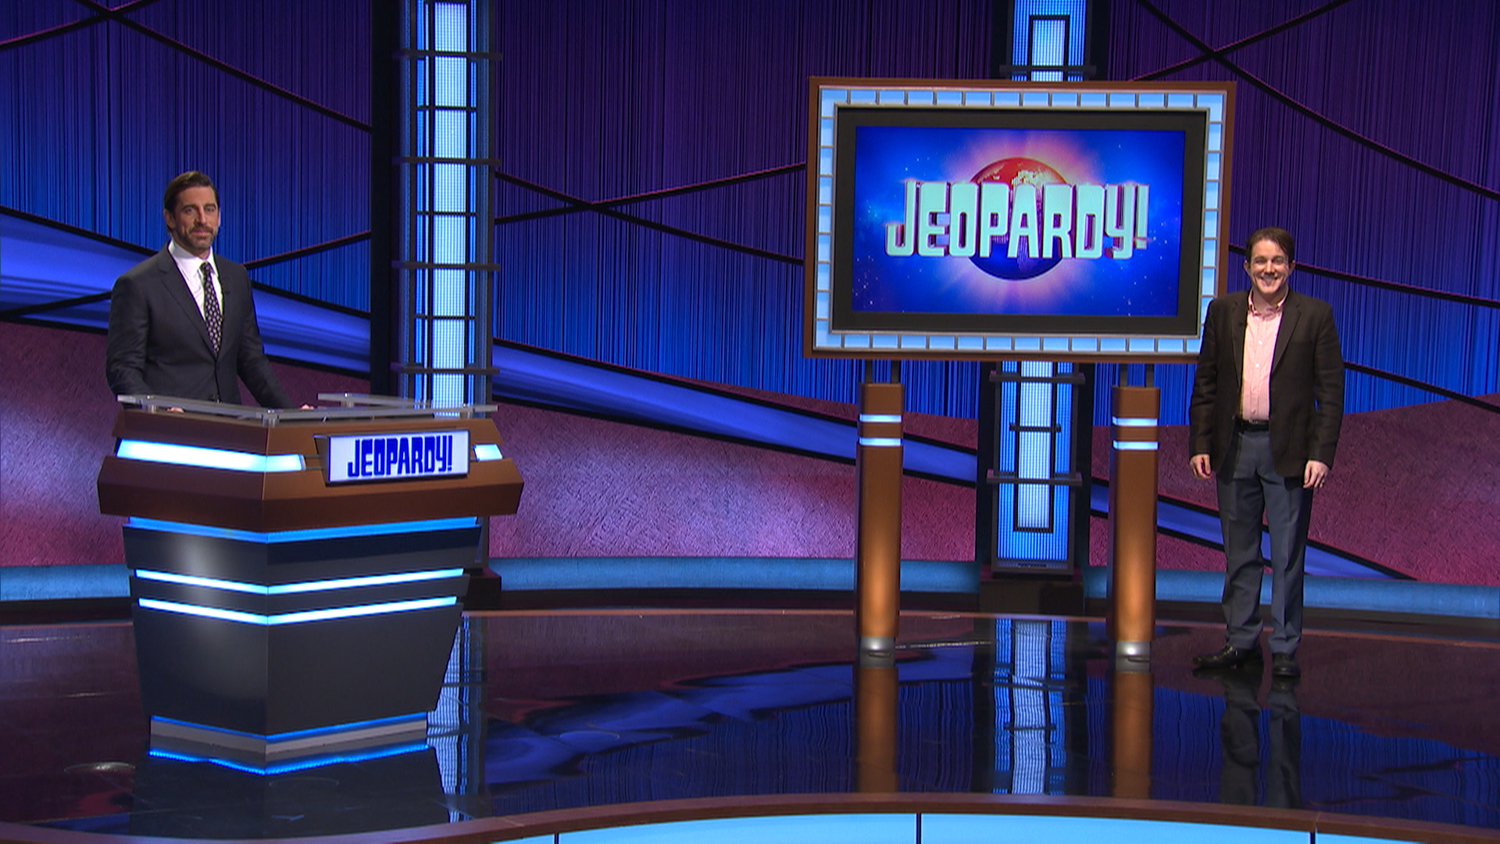 Aaron Rogers and Patrick Hume on the Jeopardy! set